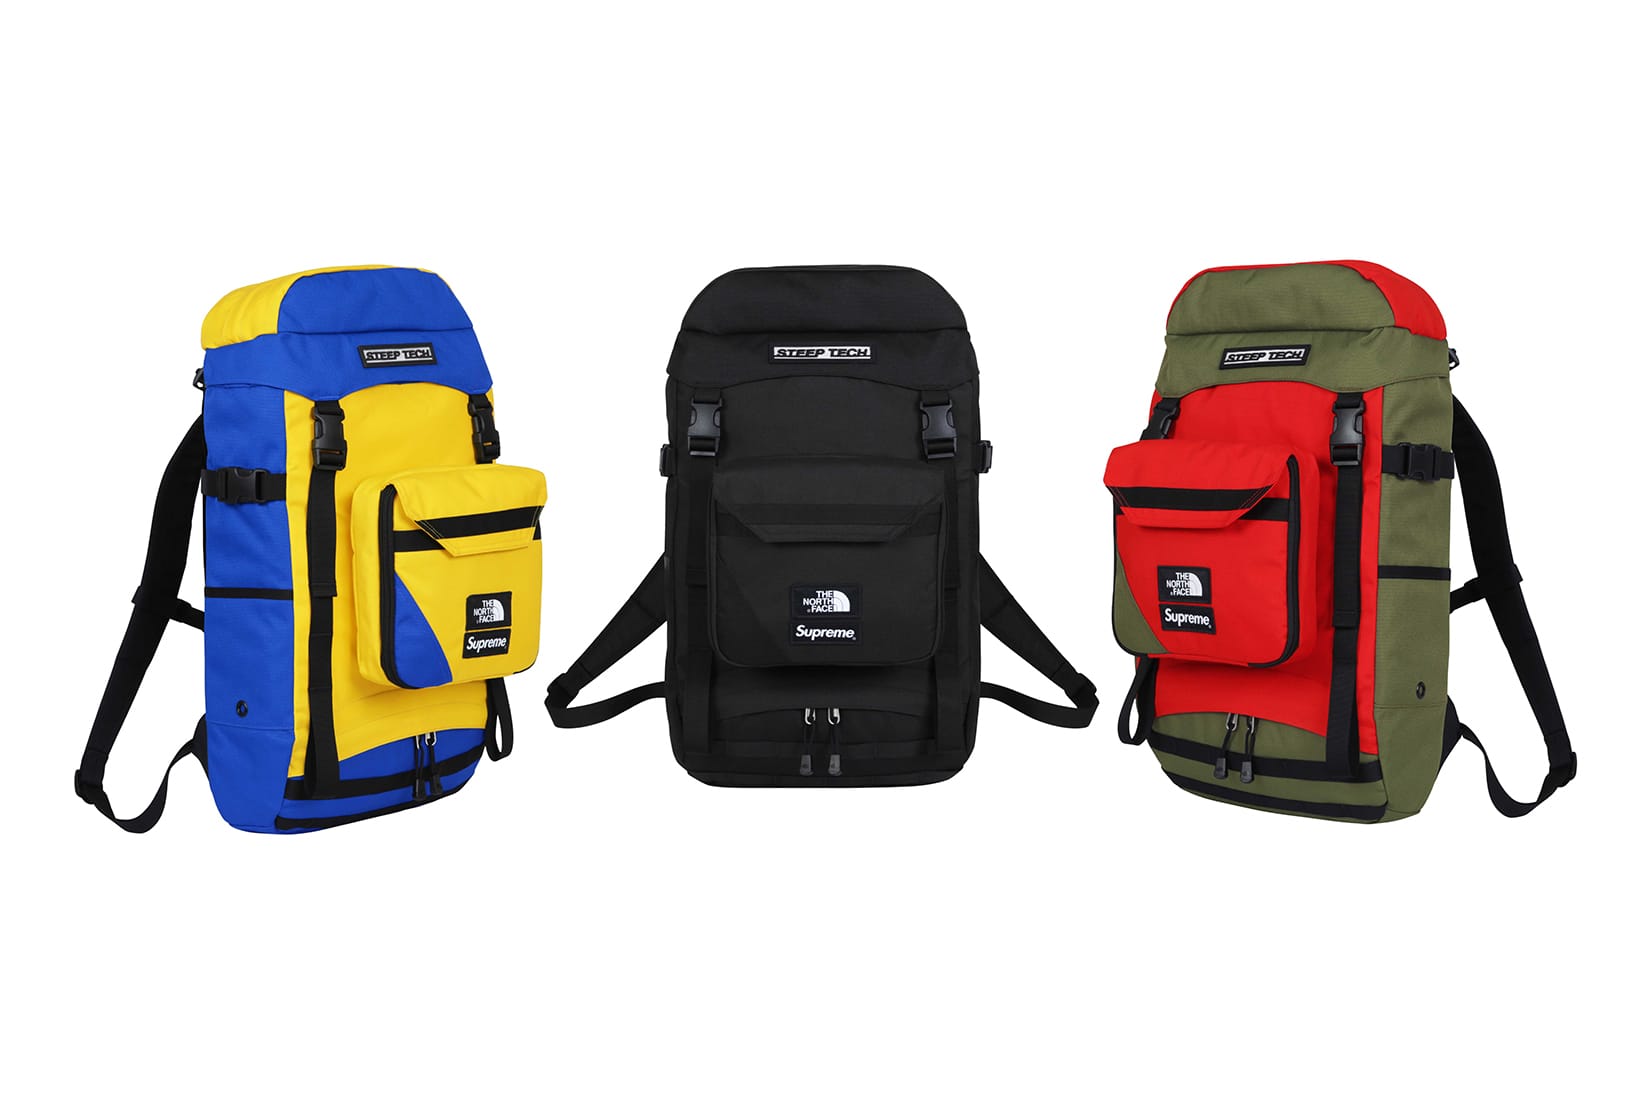 the north face tech backpack